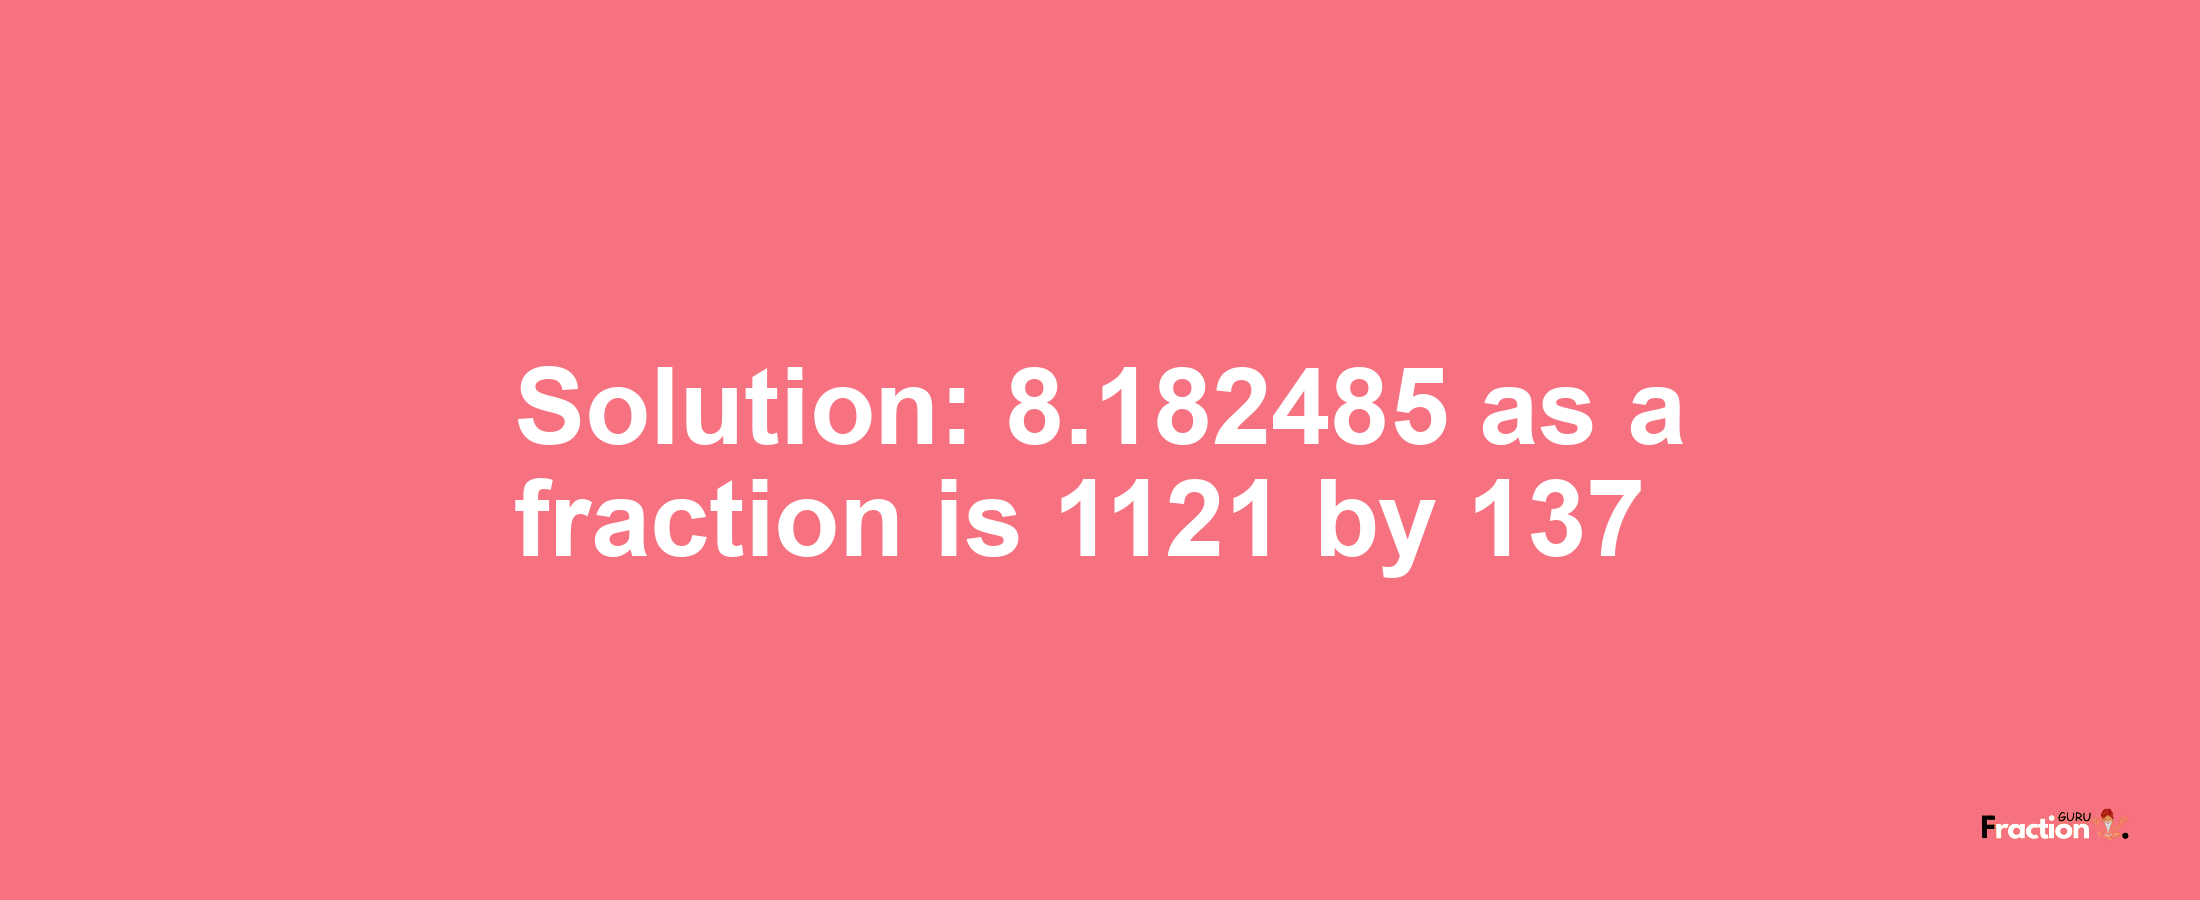 Solution:8.182485 as a fraction is 1121/137